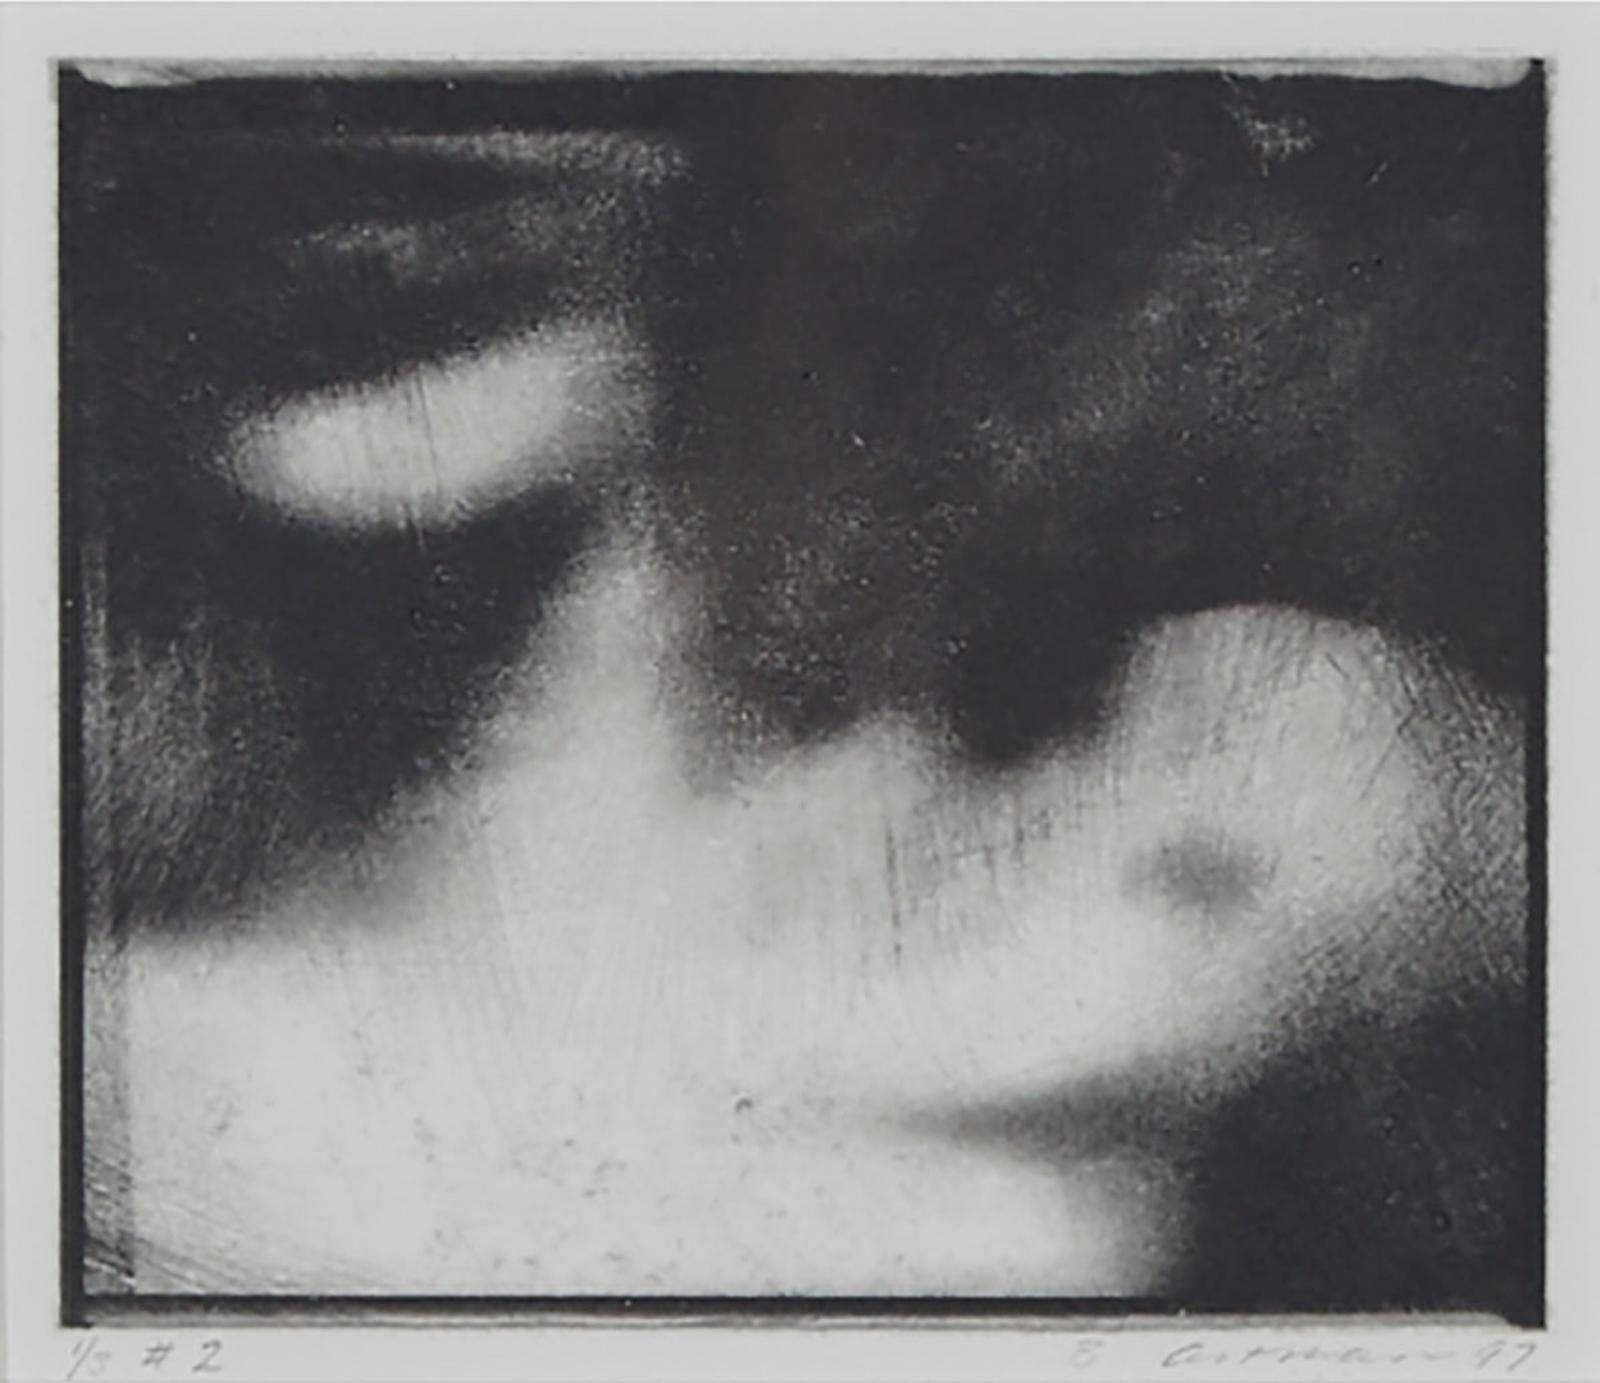 Barbara Ann Astman (1950) - Untitled #2, From The Series 